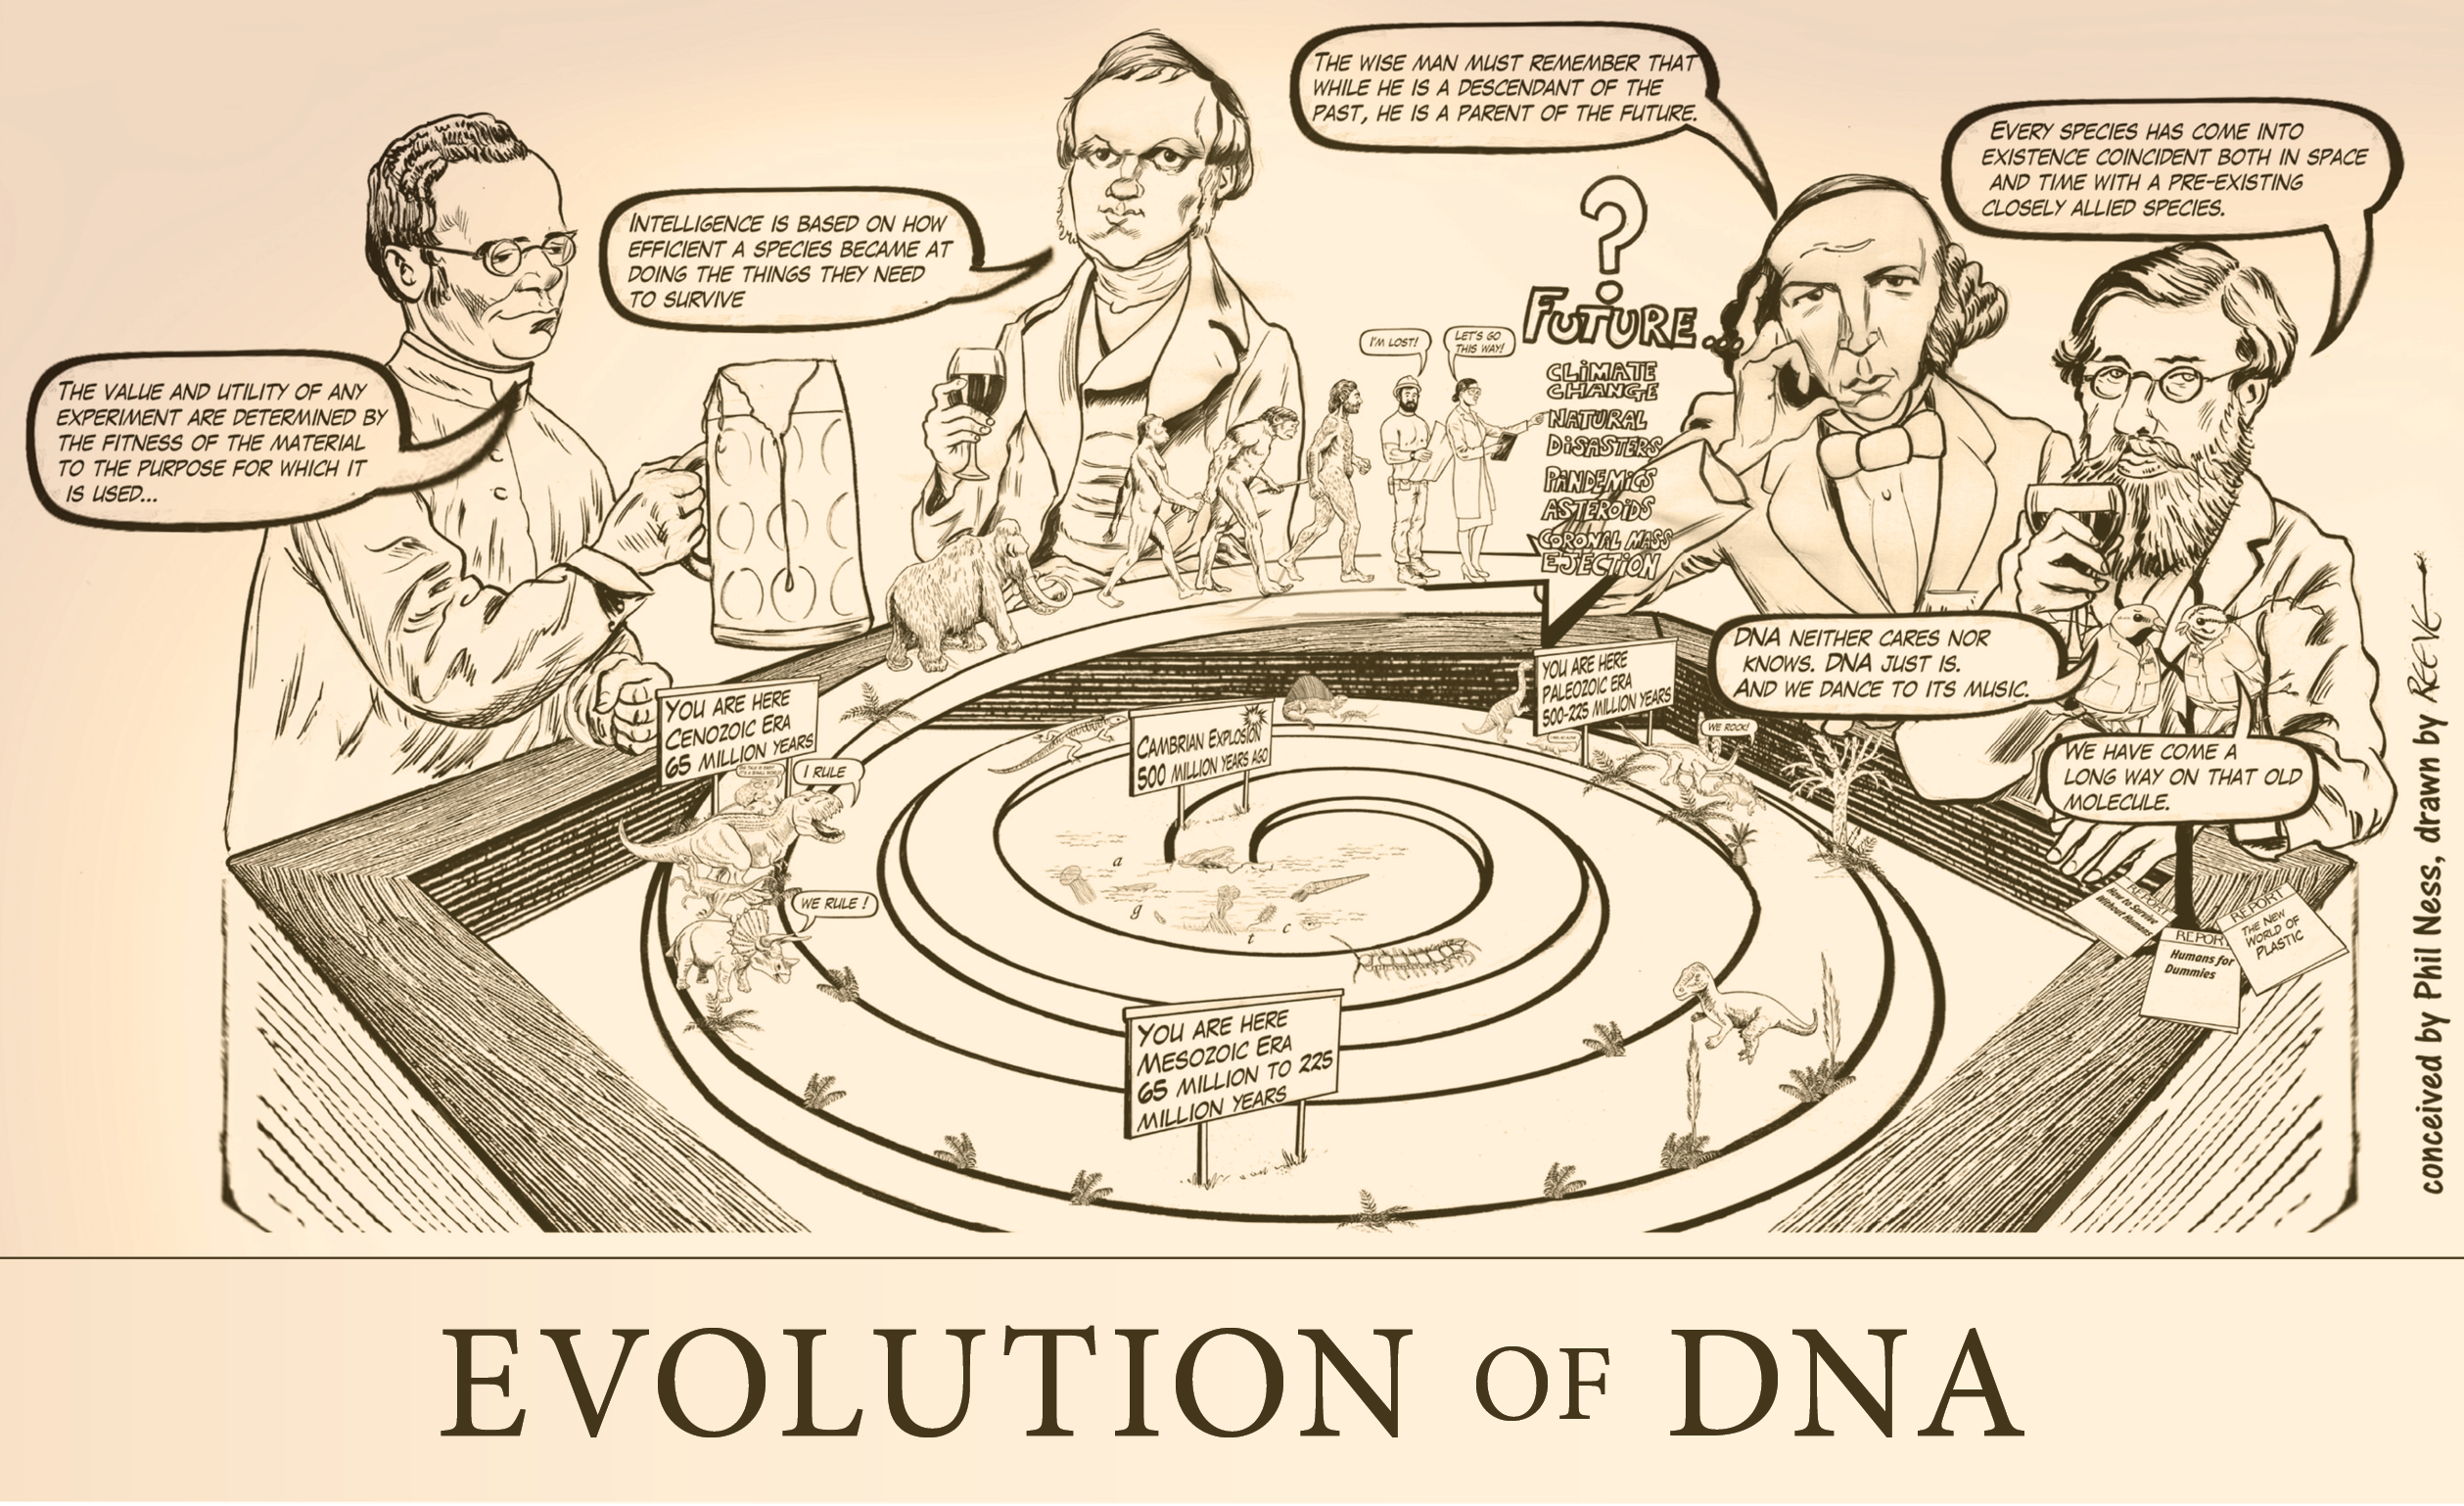 Cartoon: Evolution of DNA, conceived by Phil Ness, drawn by Reeve, 2022.